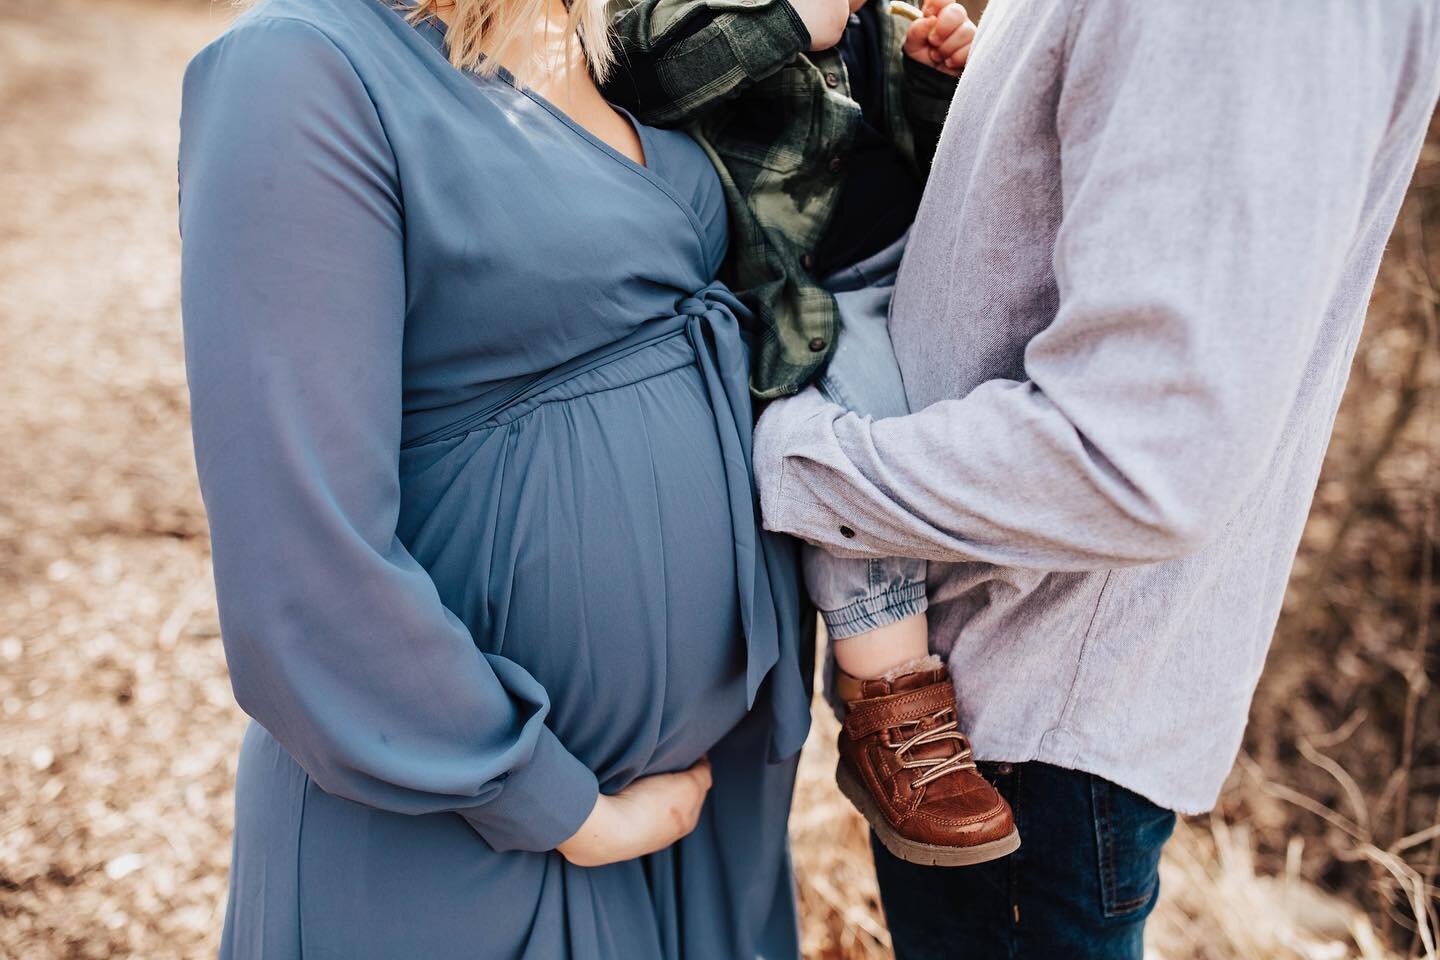 The product of love is the life you bring into this world ❤️ We had the most joy-filled afternoon capturing this mama- and daddy-to-be as they prepare for the next chapter in their story.

#photographer #photoandvideo #shootandshare #lookslikefilm #c